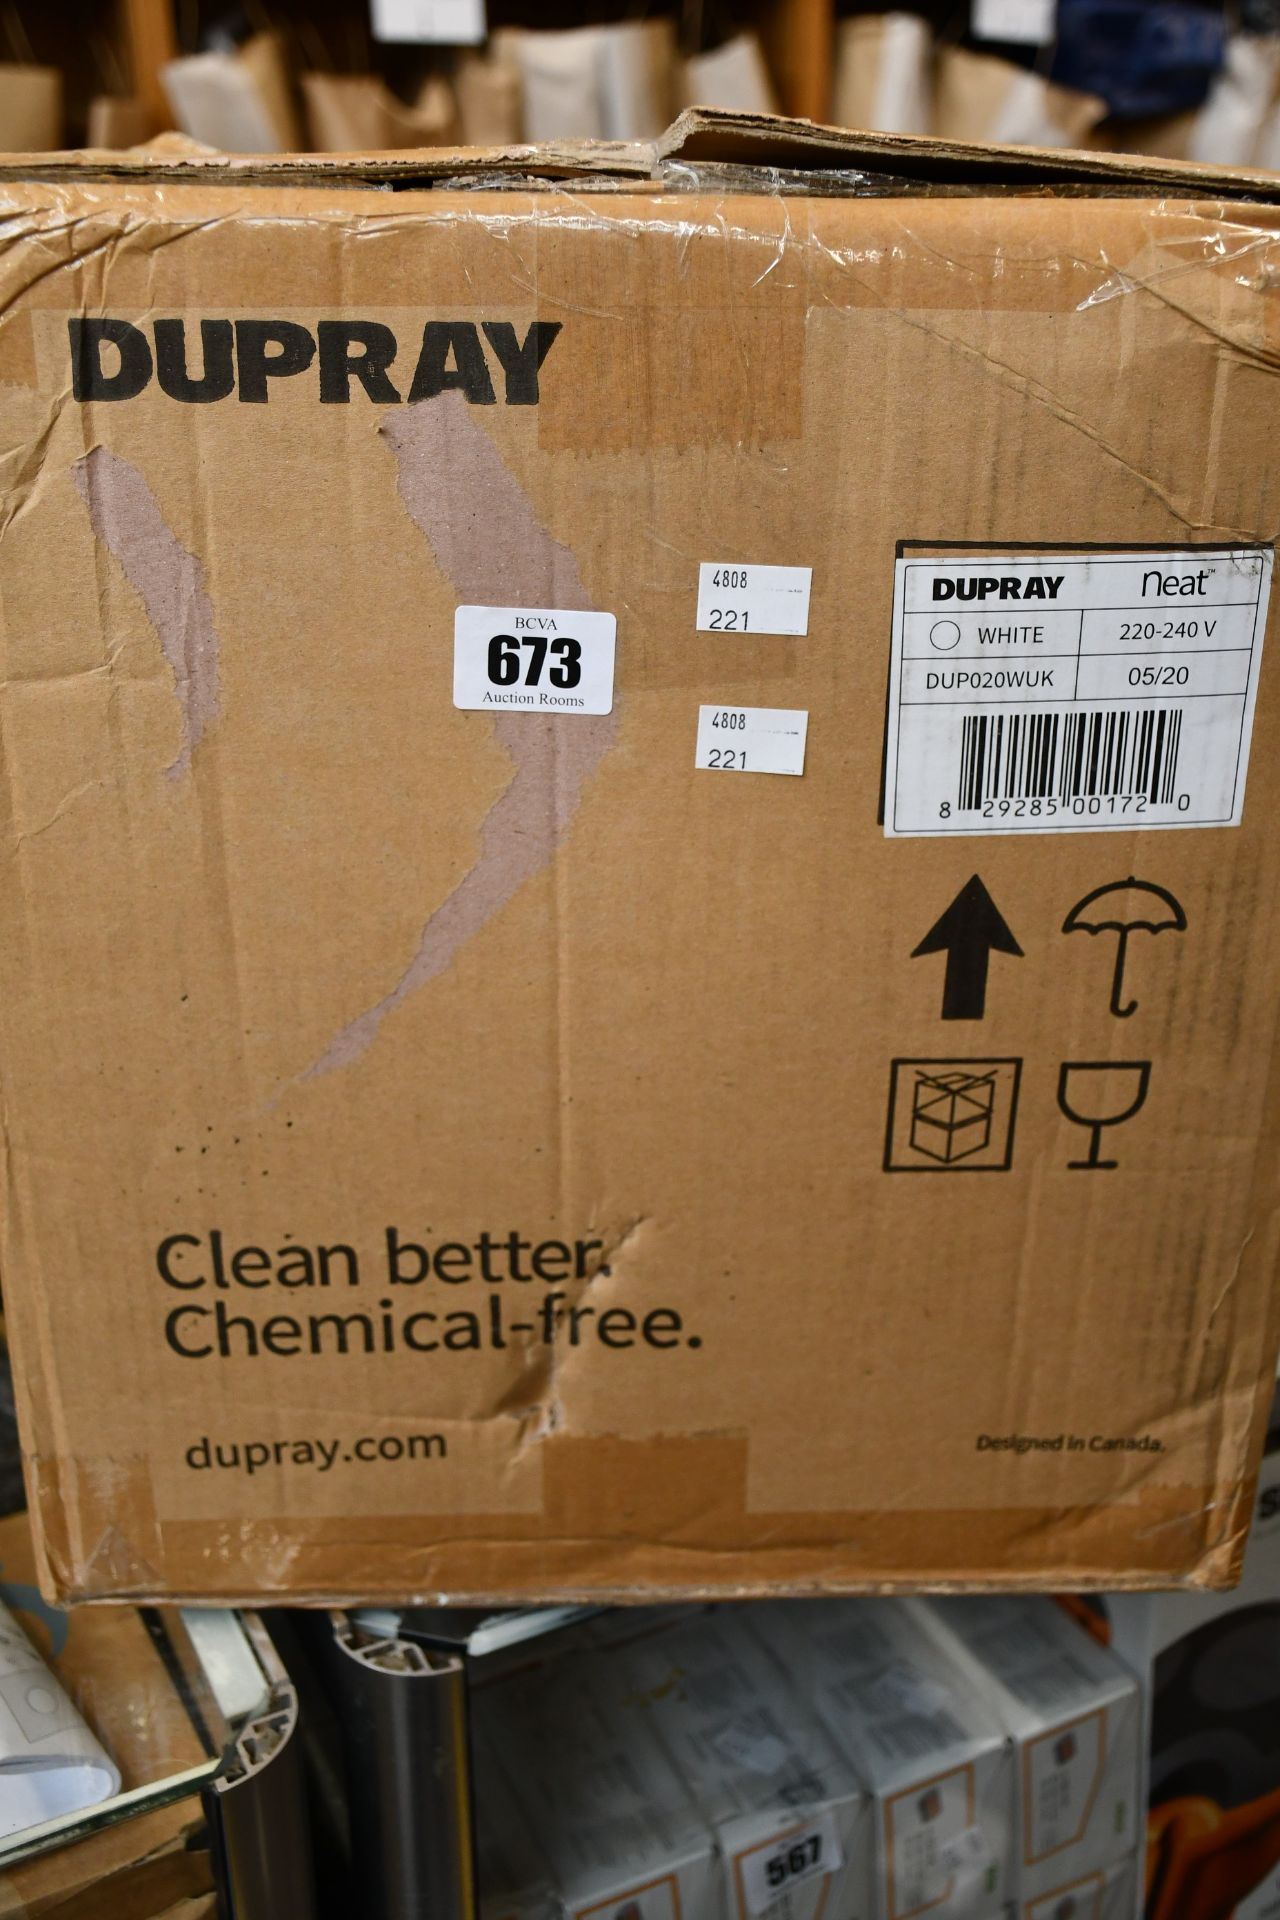 A boxed Dupray NEAT Multipurpose Steam Cleaner.